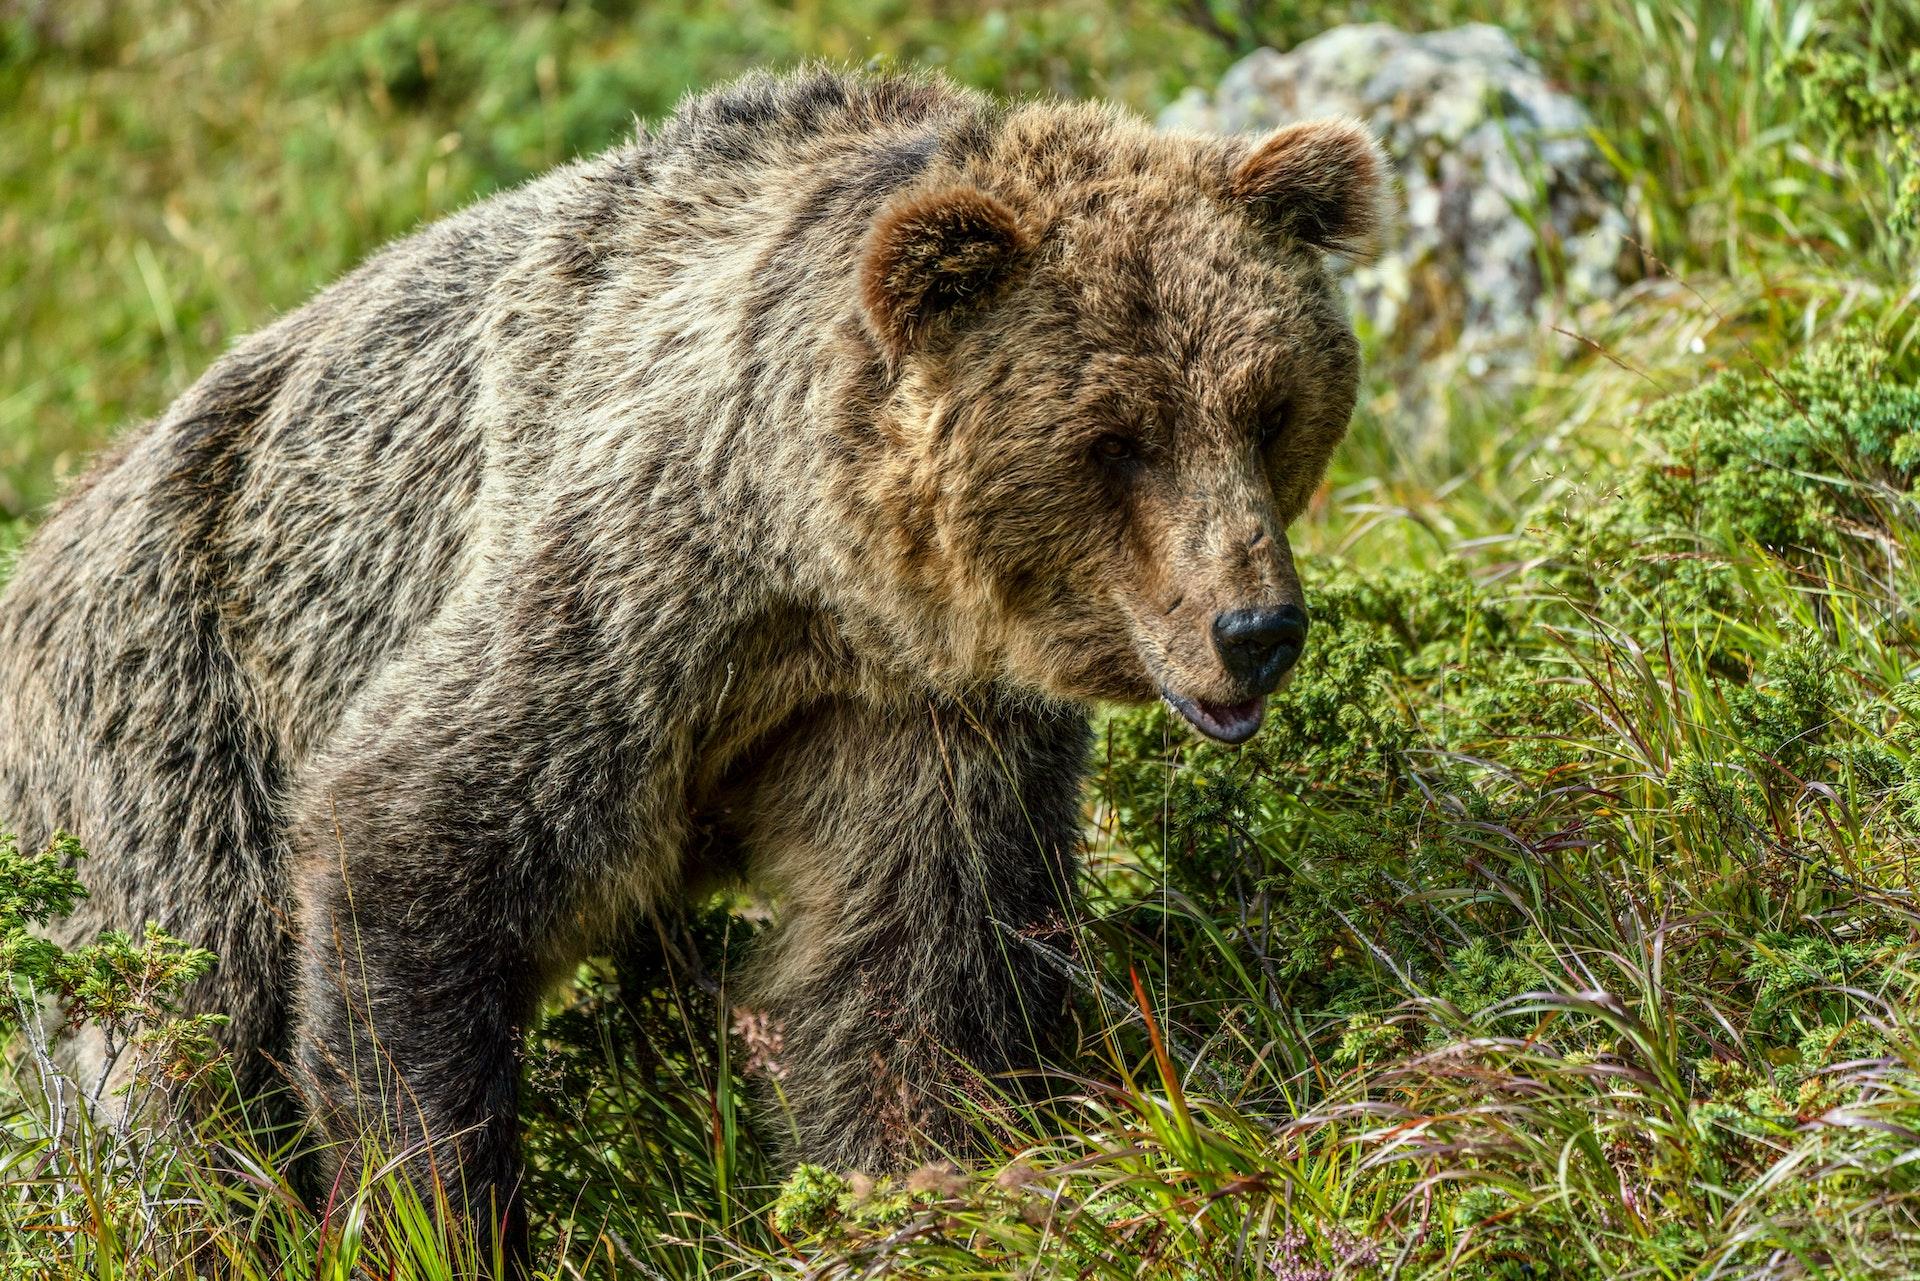 A photo of a Grizzly bear